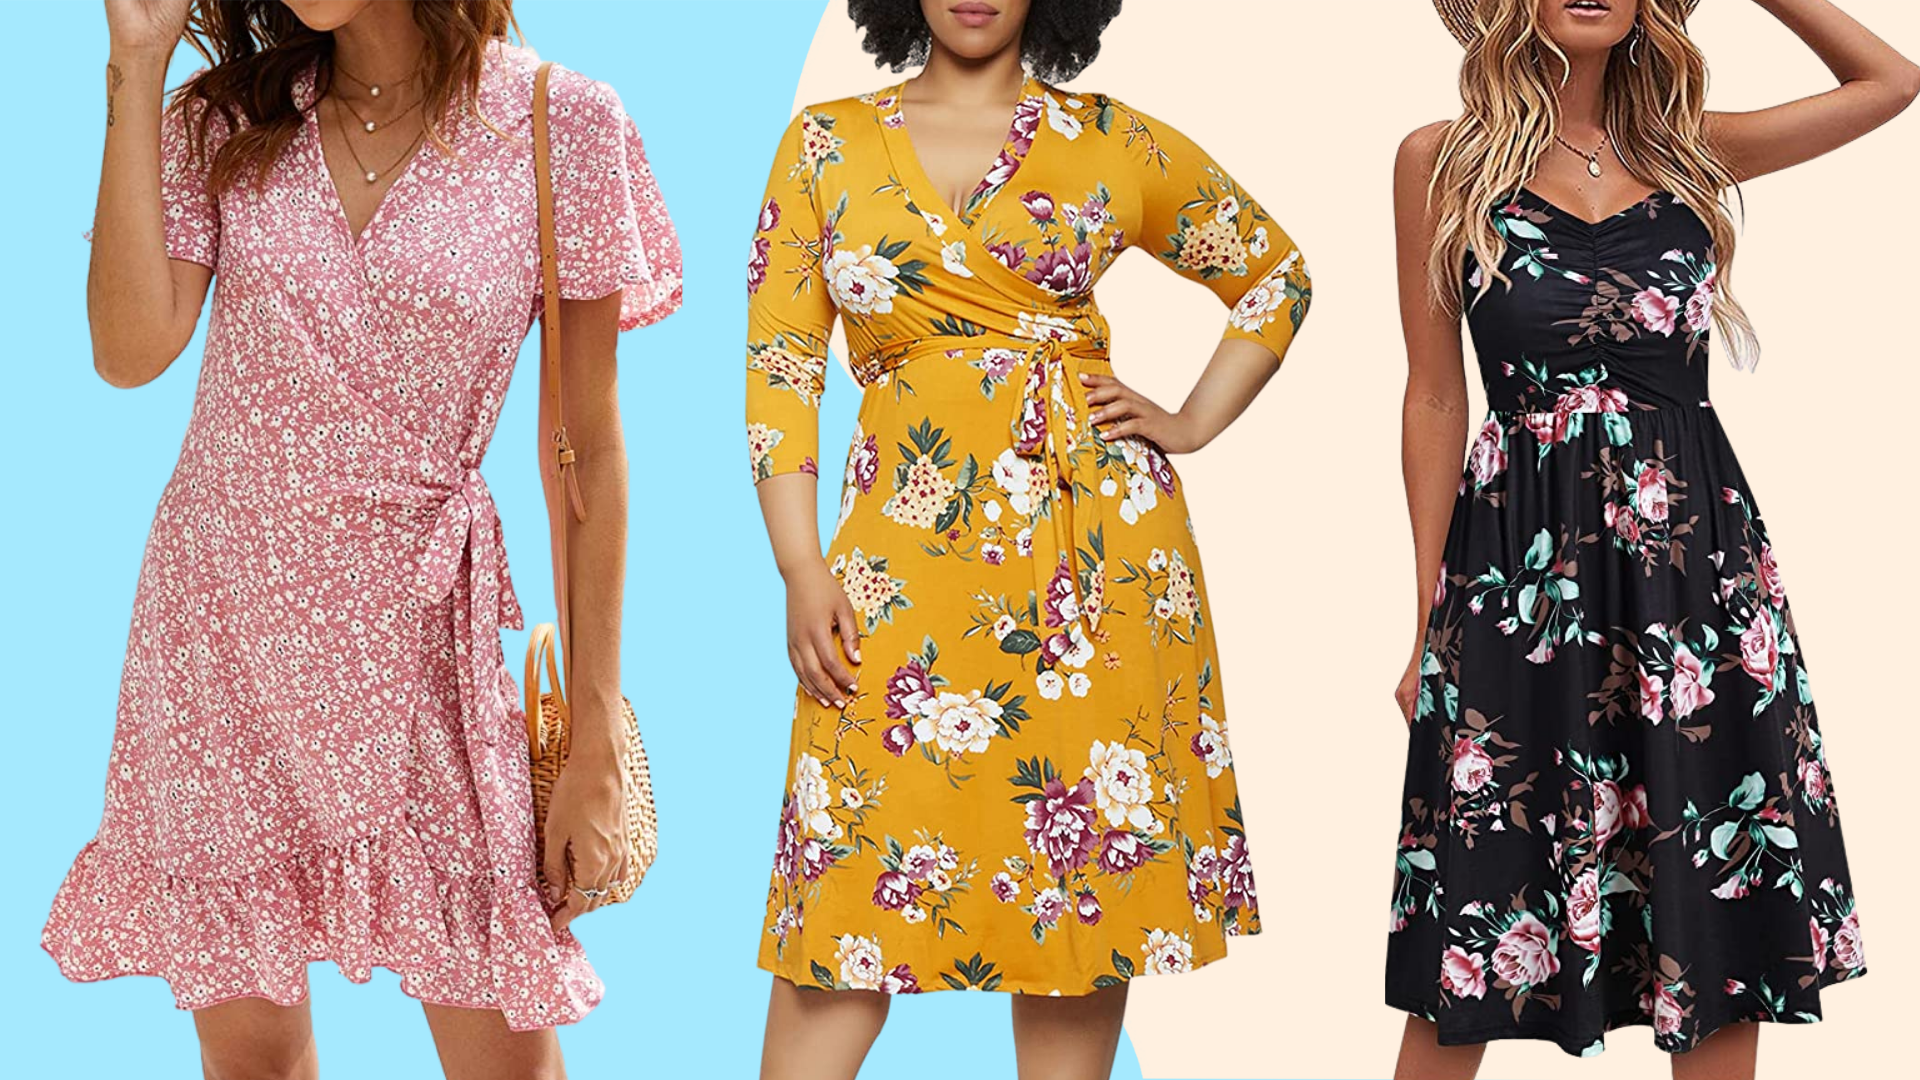 The best spring dresses from Amazon ...